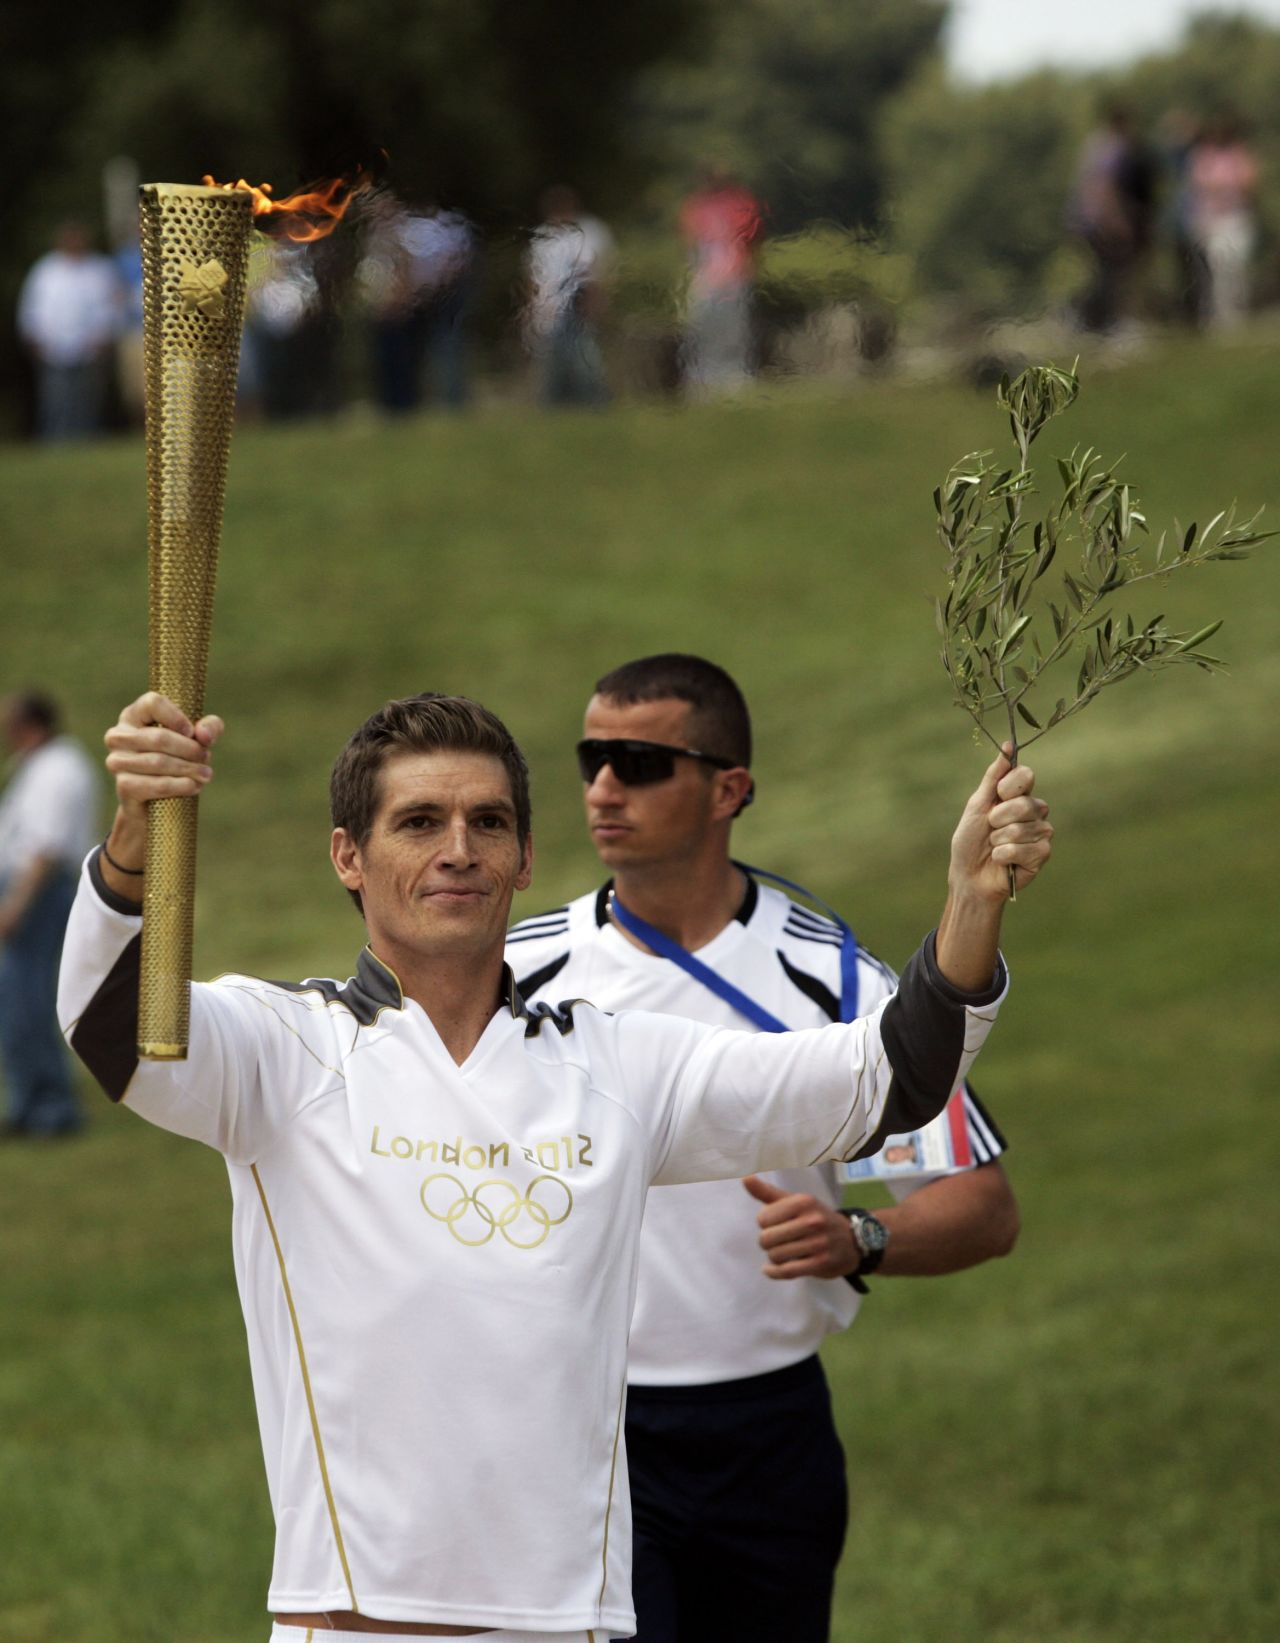 More than 8,000 torch-bearers will carry the flame before it arrives at the Olympic Stadium in east London on July 27. The first was Greek swimming champion Spyros Gianniotis.